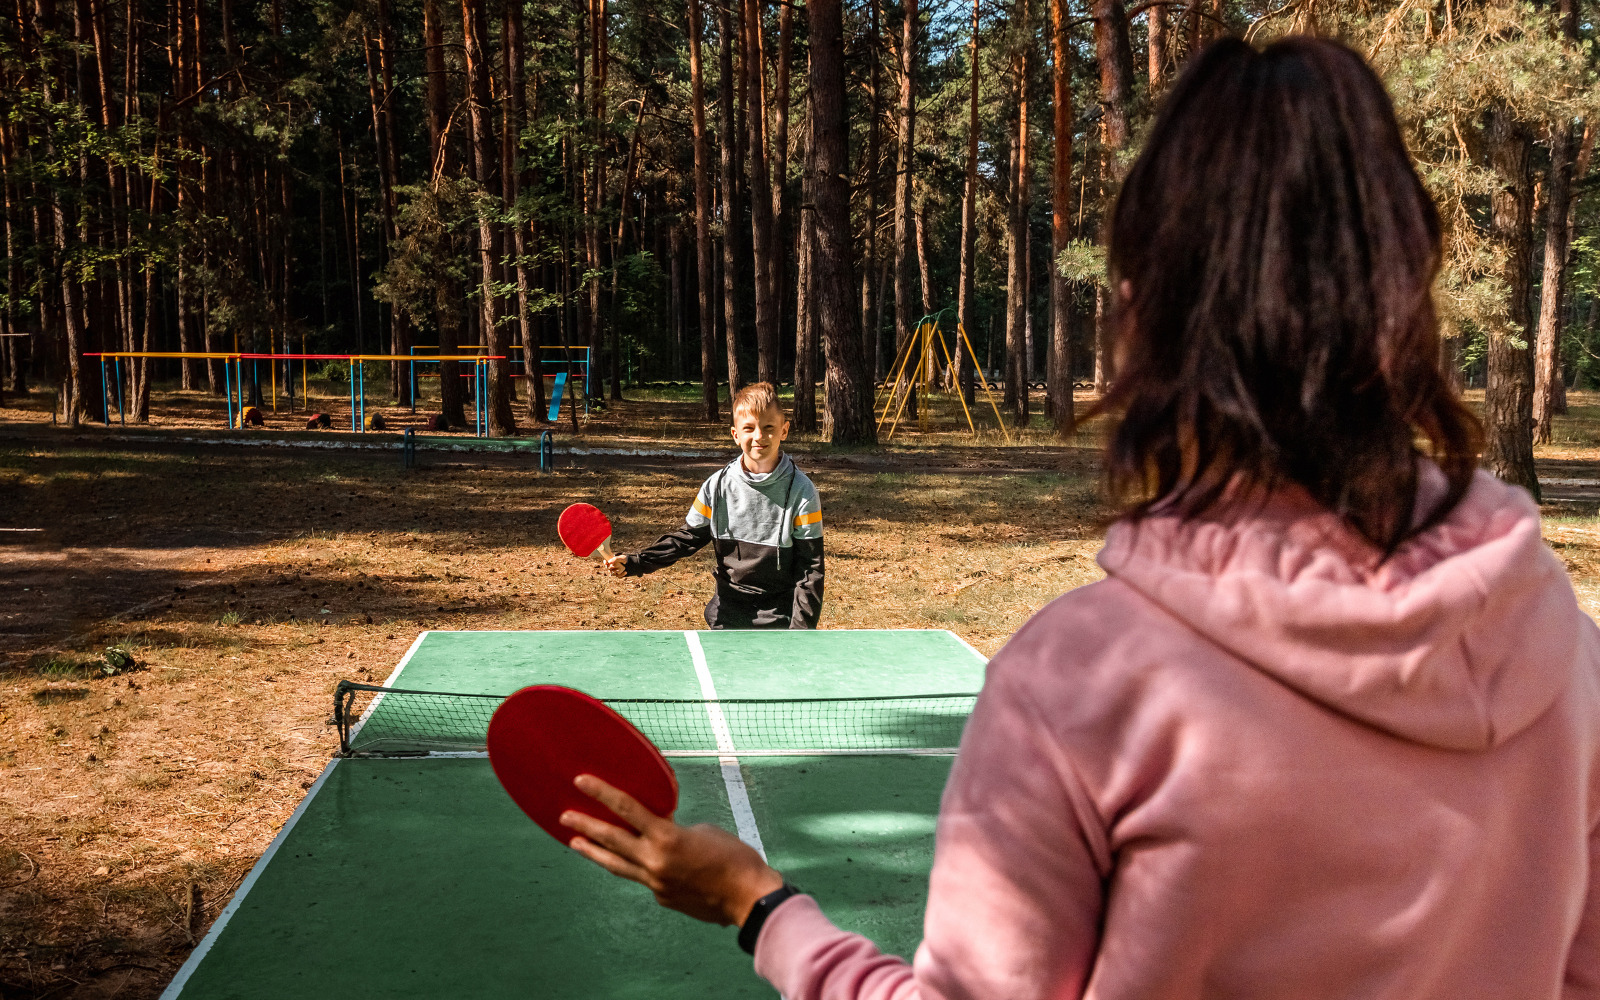 A young boy playing table tennis with an older woman.